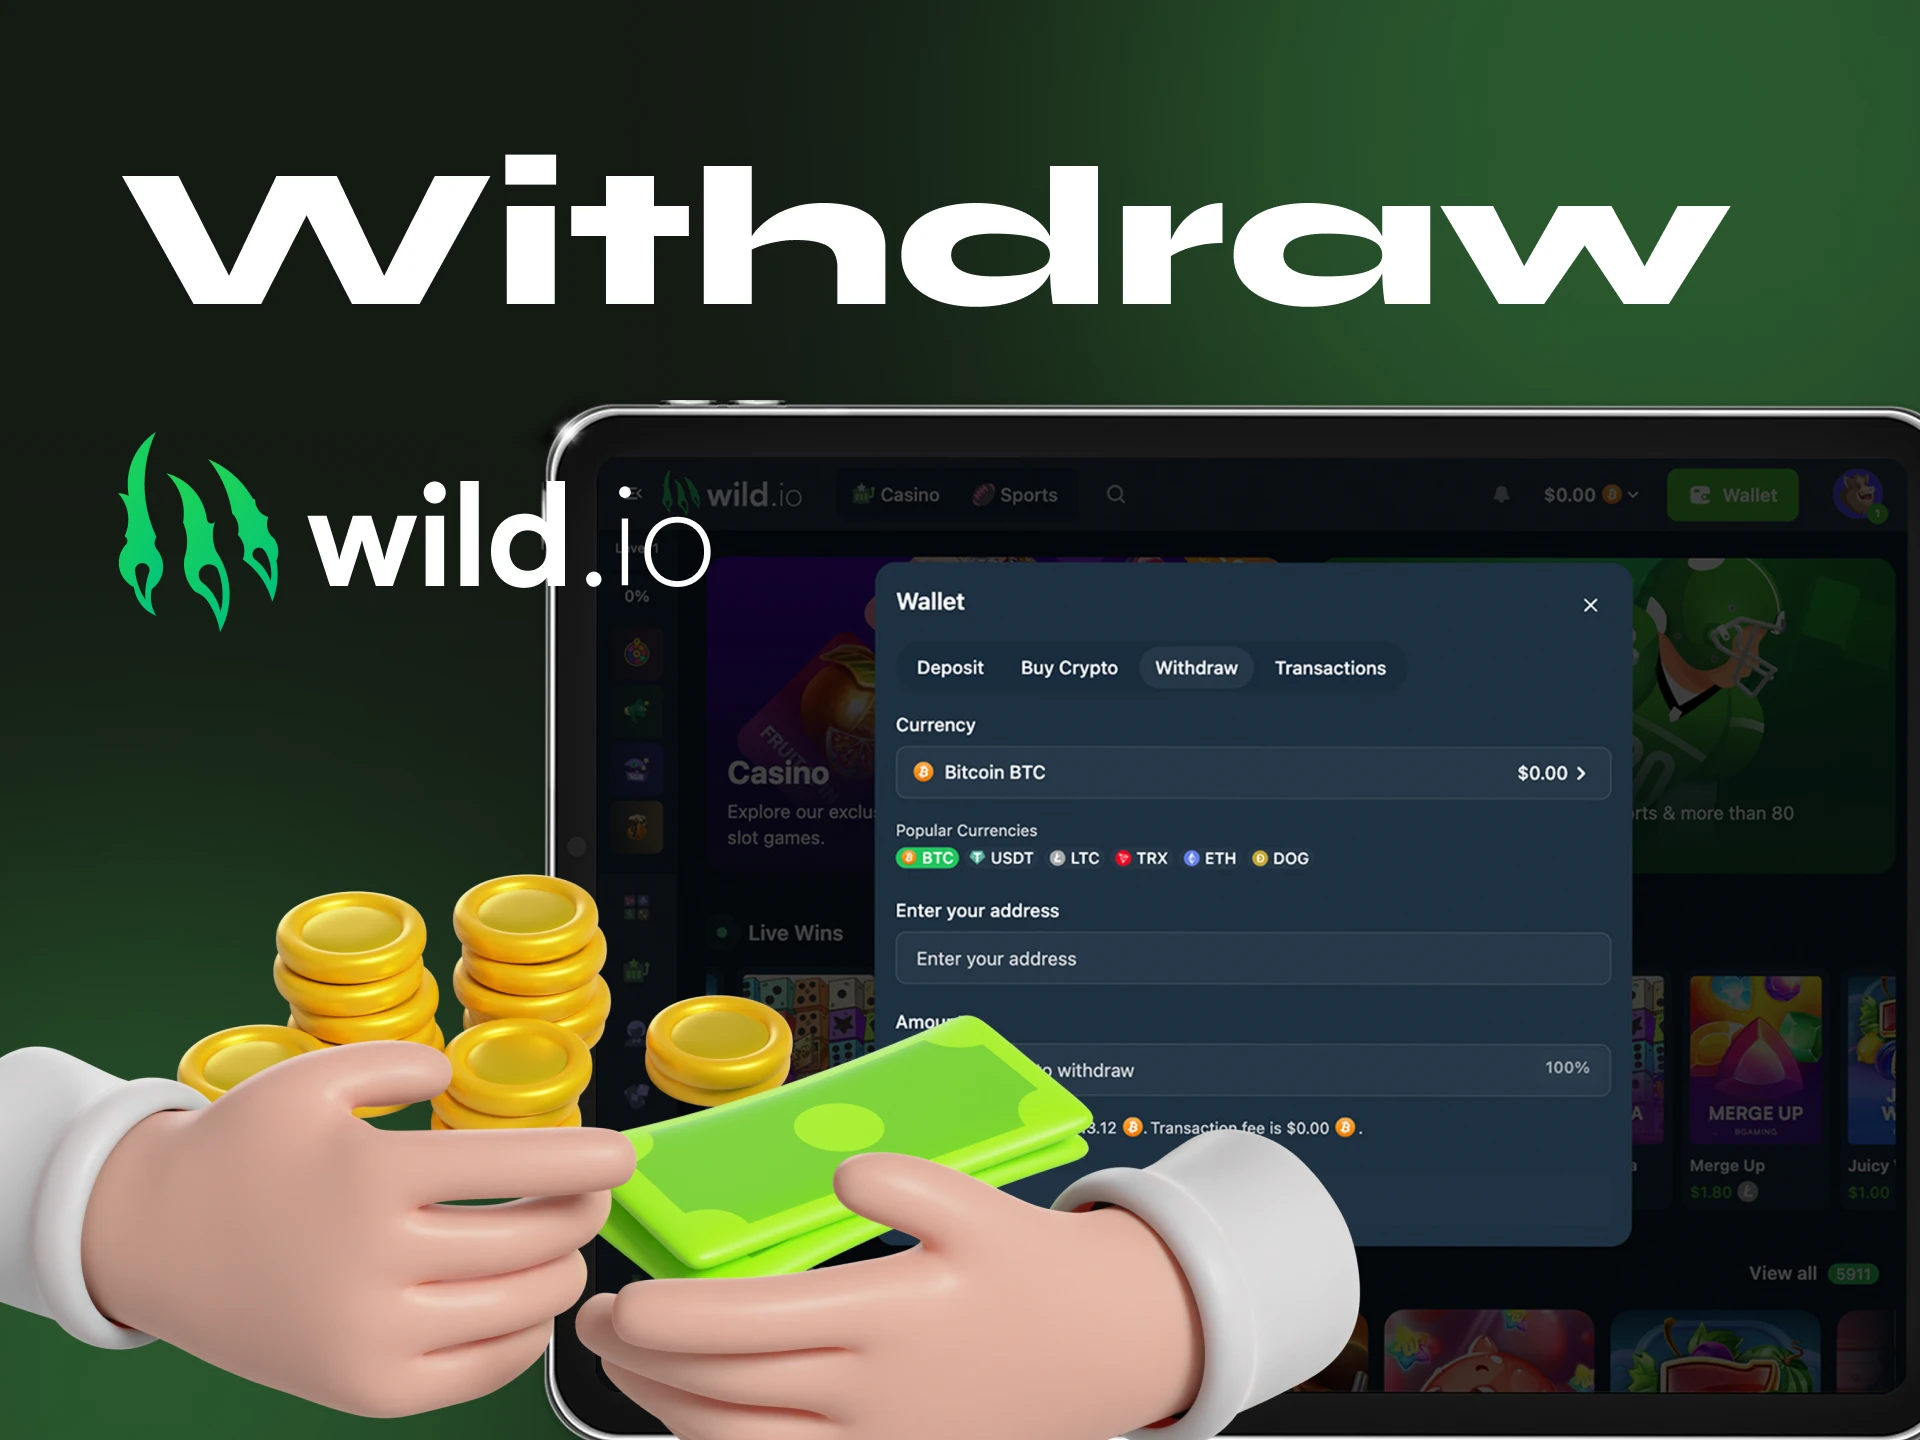 How can I withdraw money from the online casino site Wildio.